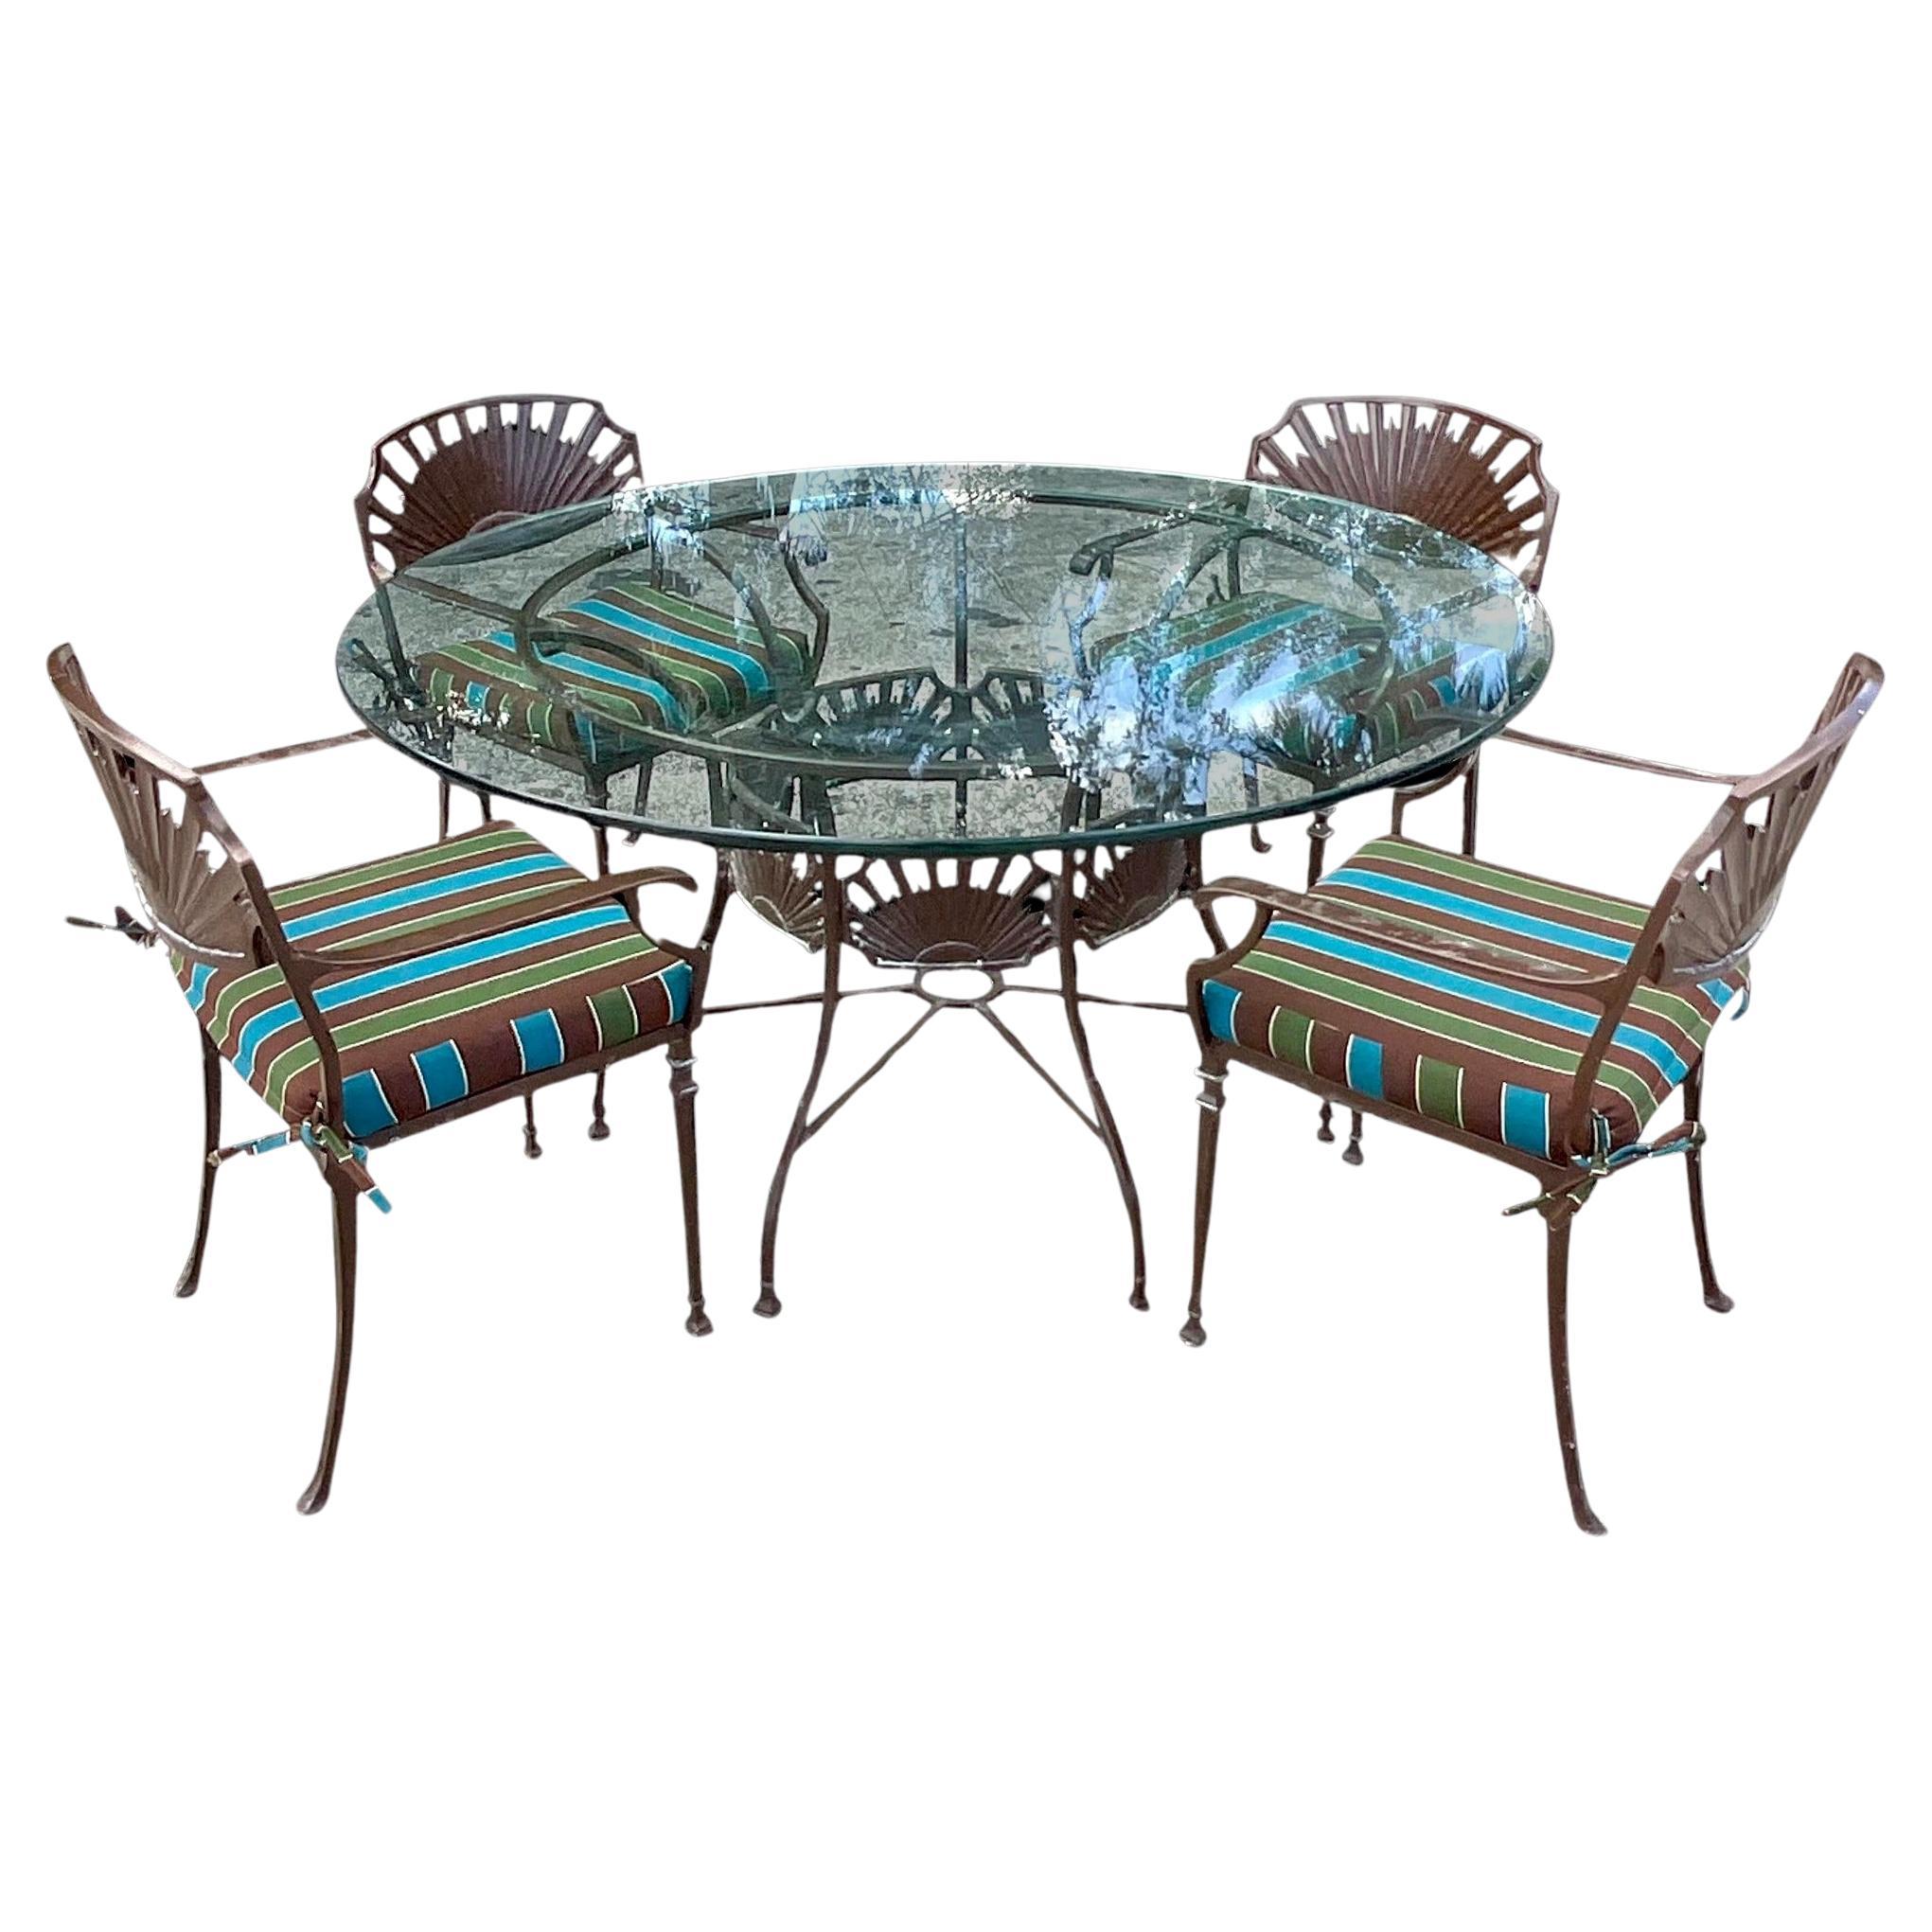 Vintage Late 20th Century Coastal Wrought Iron Outdoor Dining Table & 4 Chairs